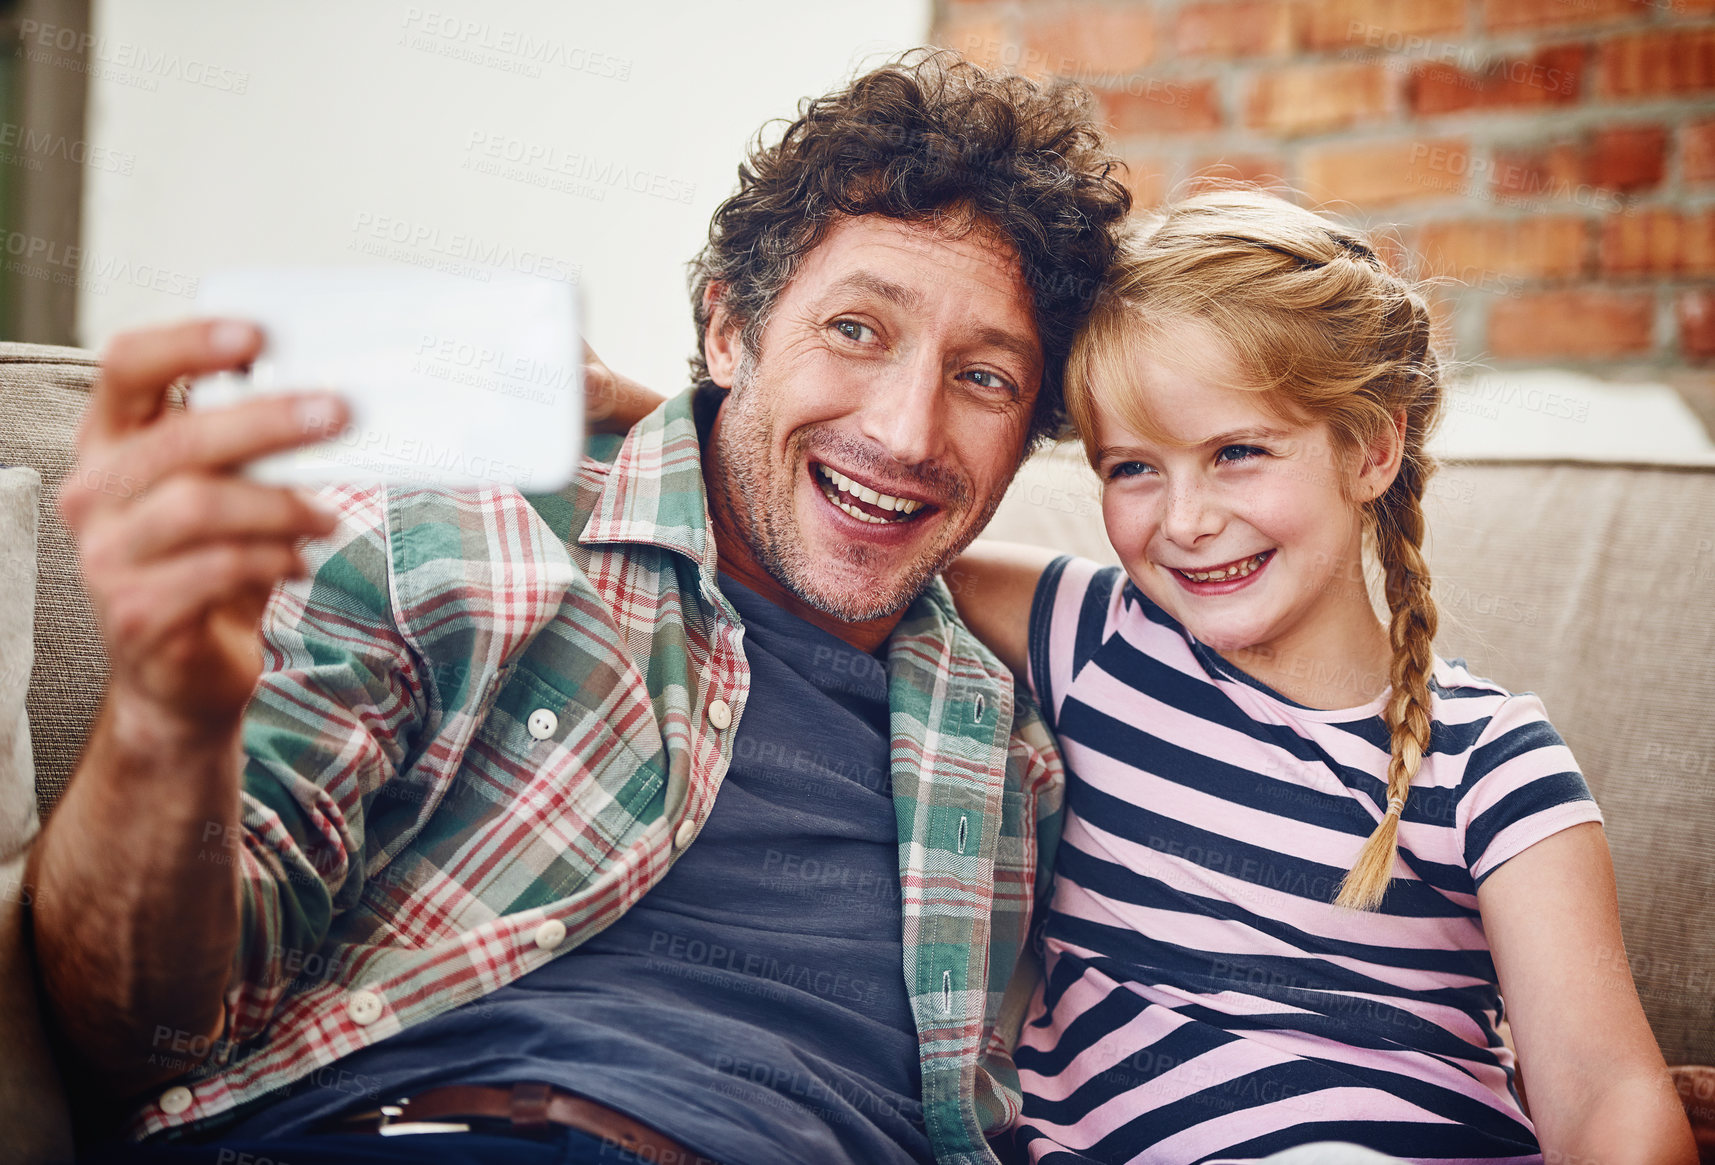 Buy stock photo Cropped shot of a father and his little daughter taking a selfie together at home